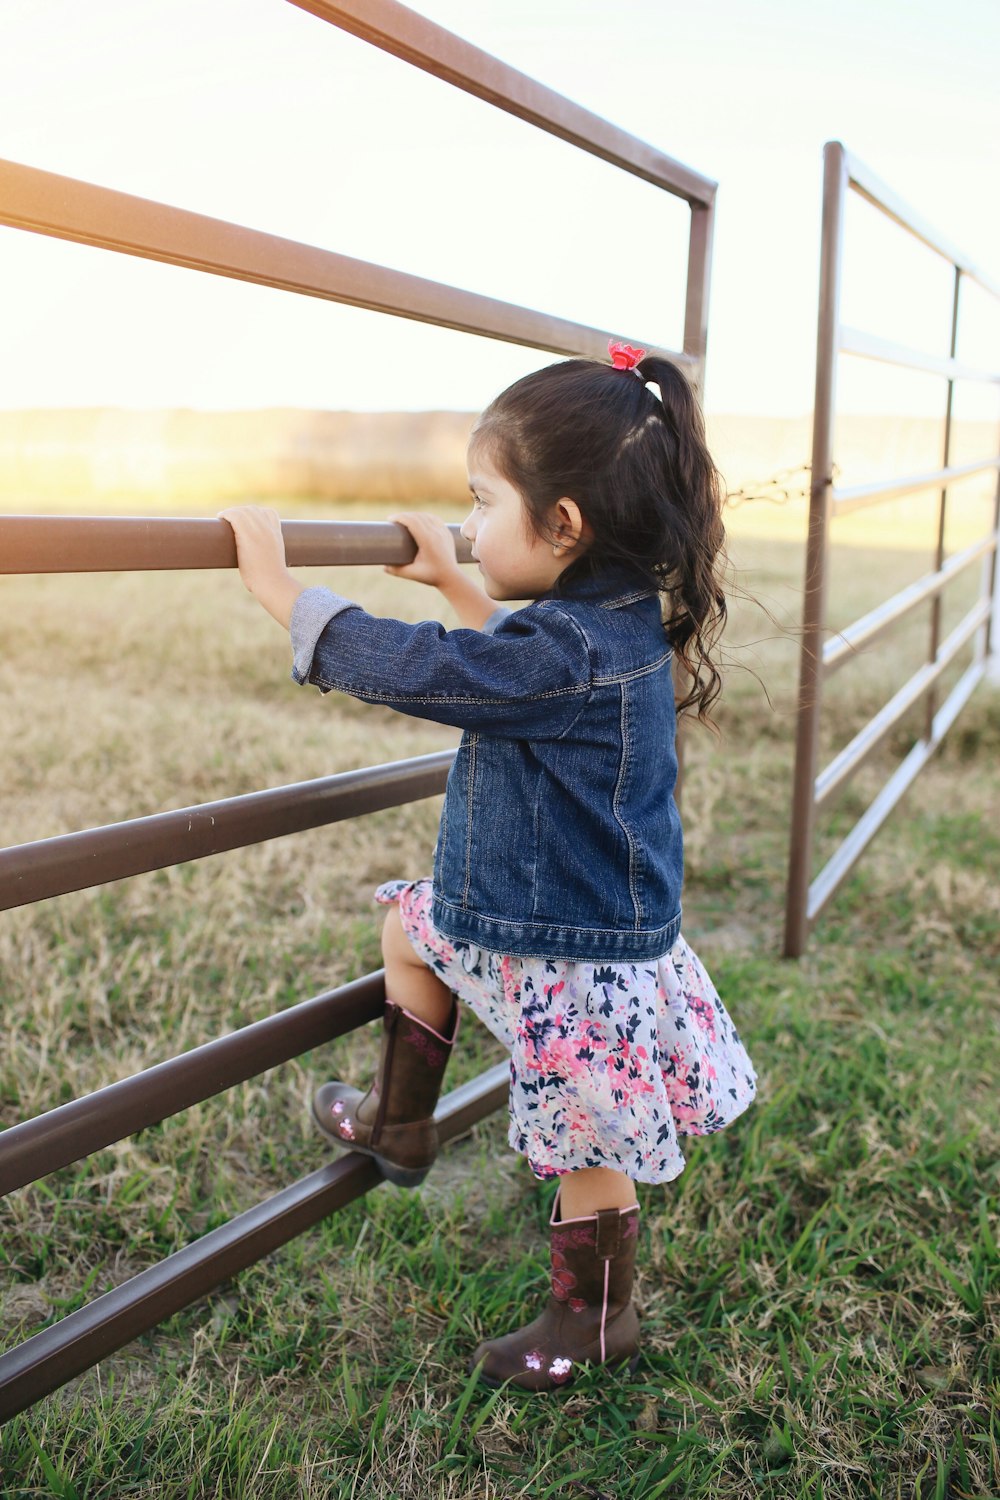 child wearing blue denim jacket standing and holding on wooden fence during daytime